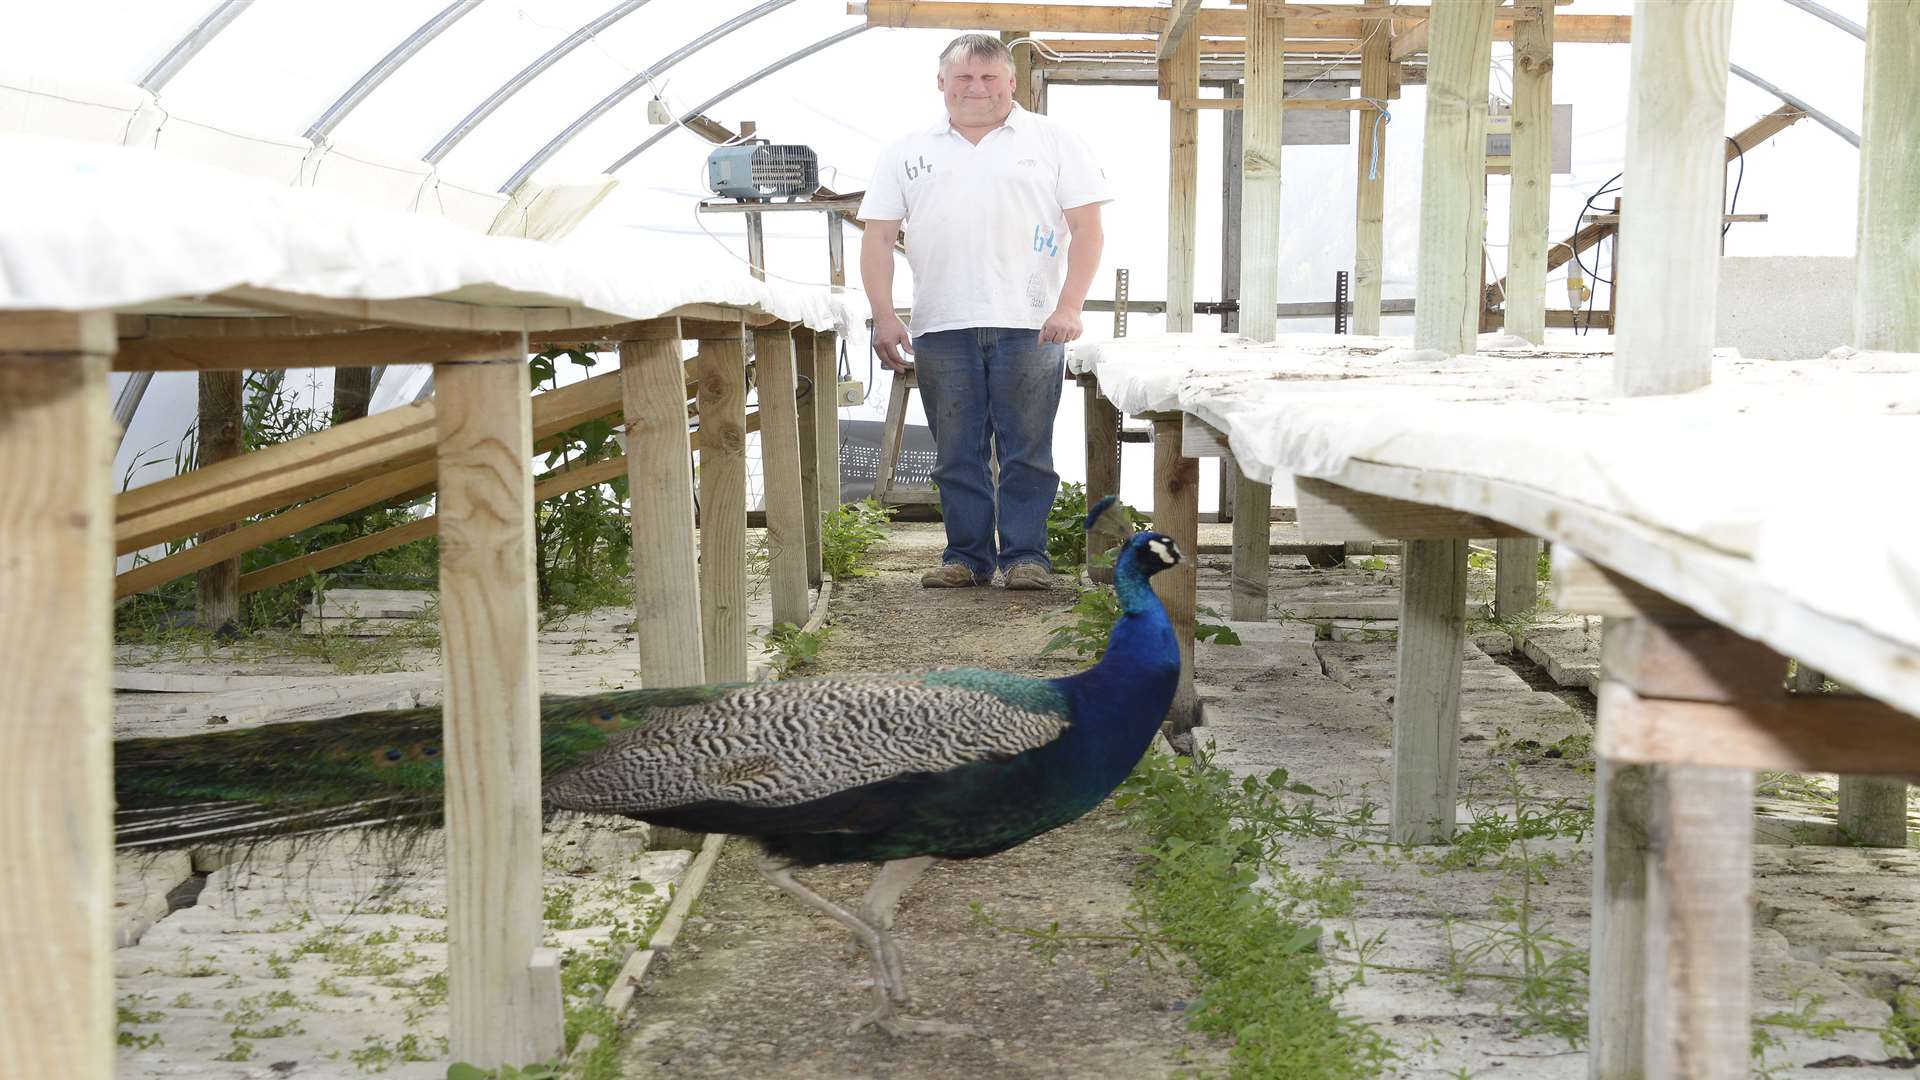 Owner's son David Hollands checks on the peacock. Picture: Paul Amos